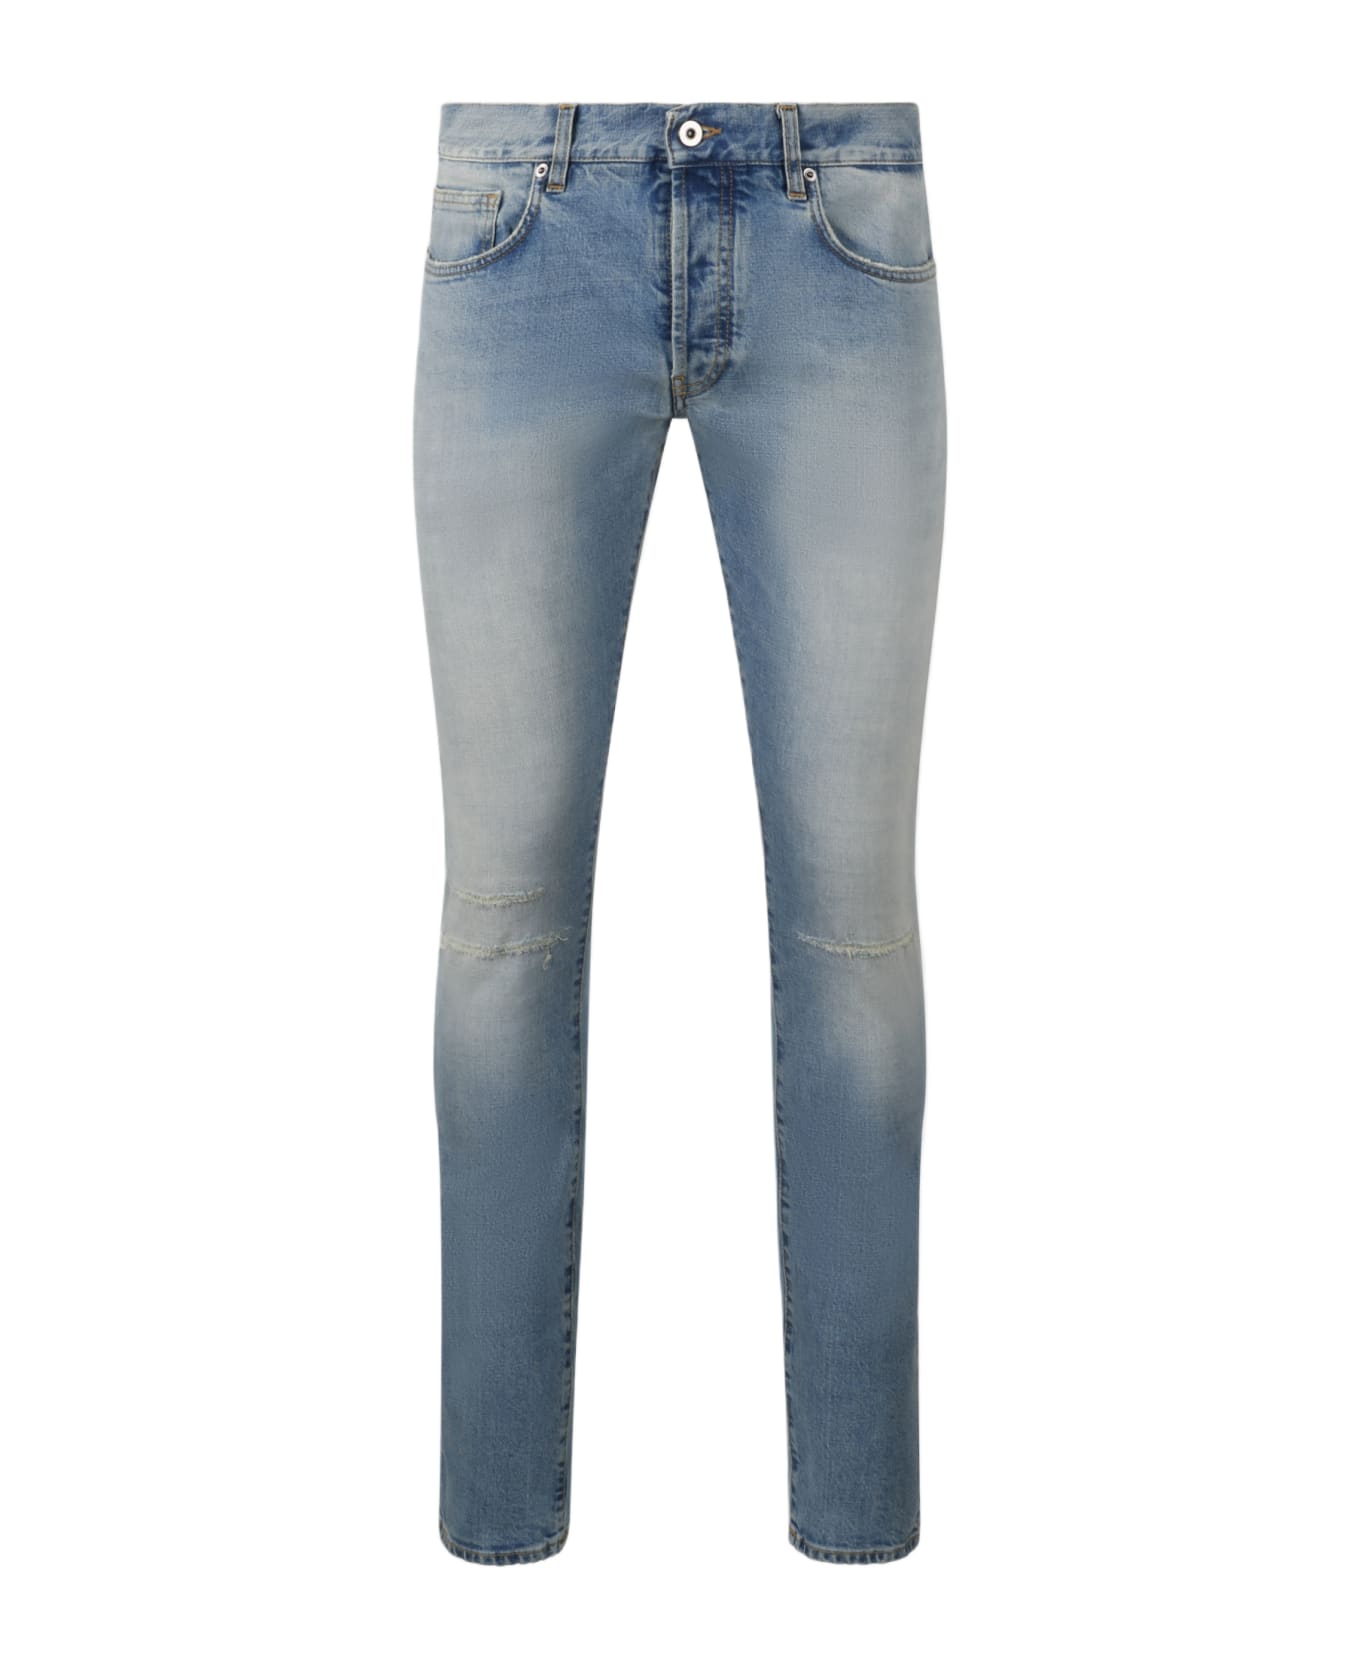 14 Bros Bleached Mended Bay Jeans - Blue